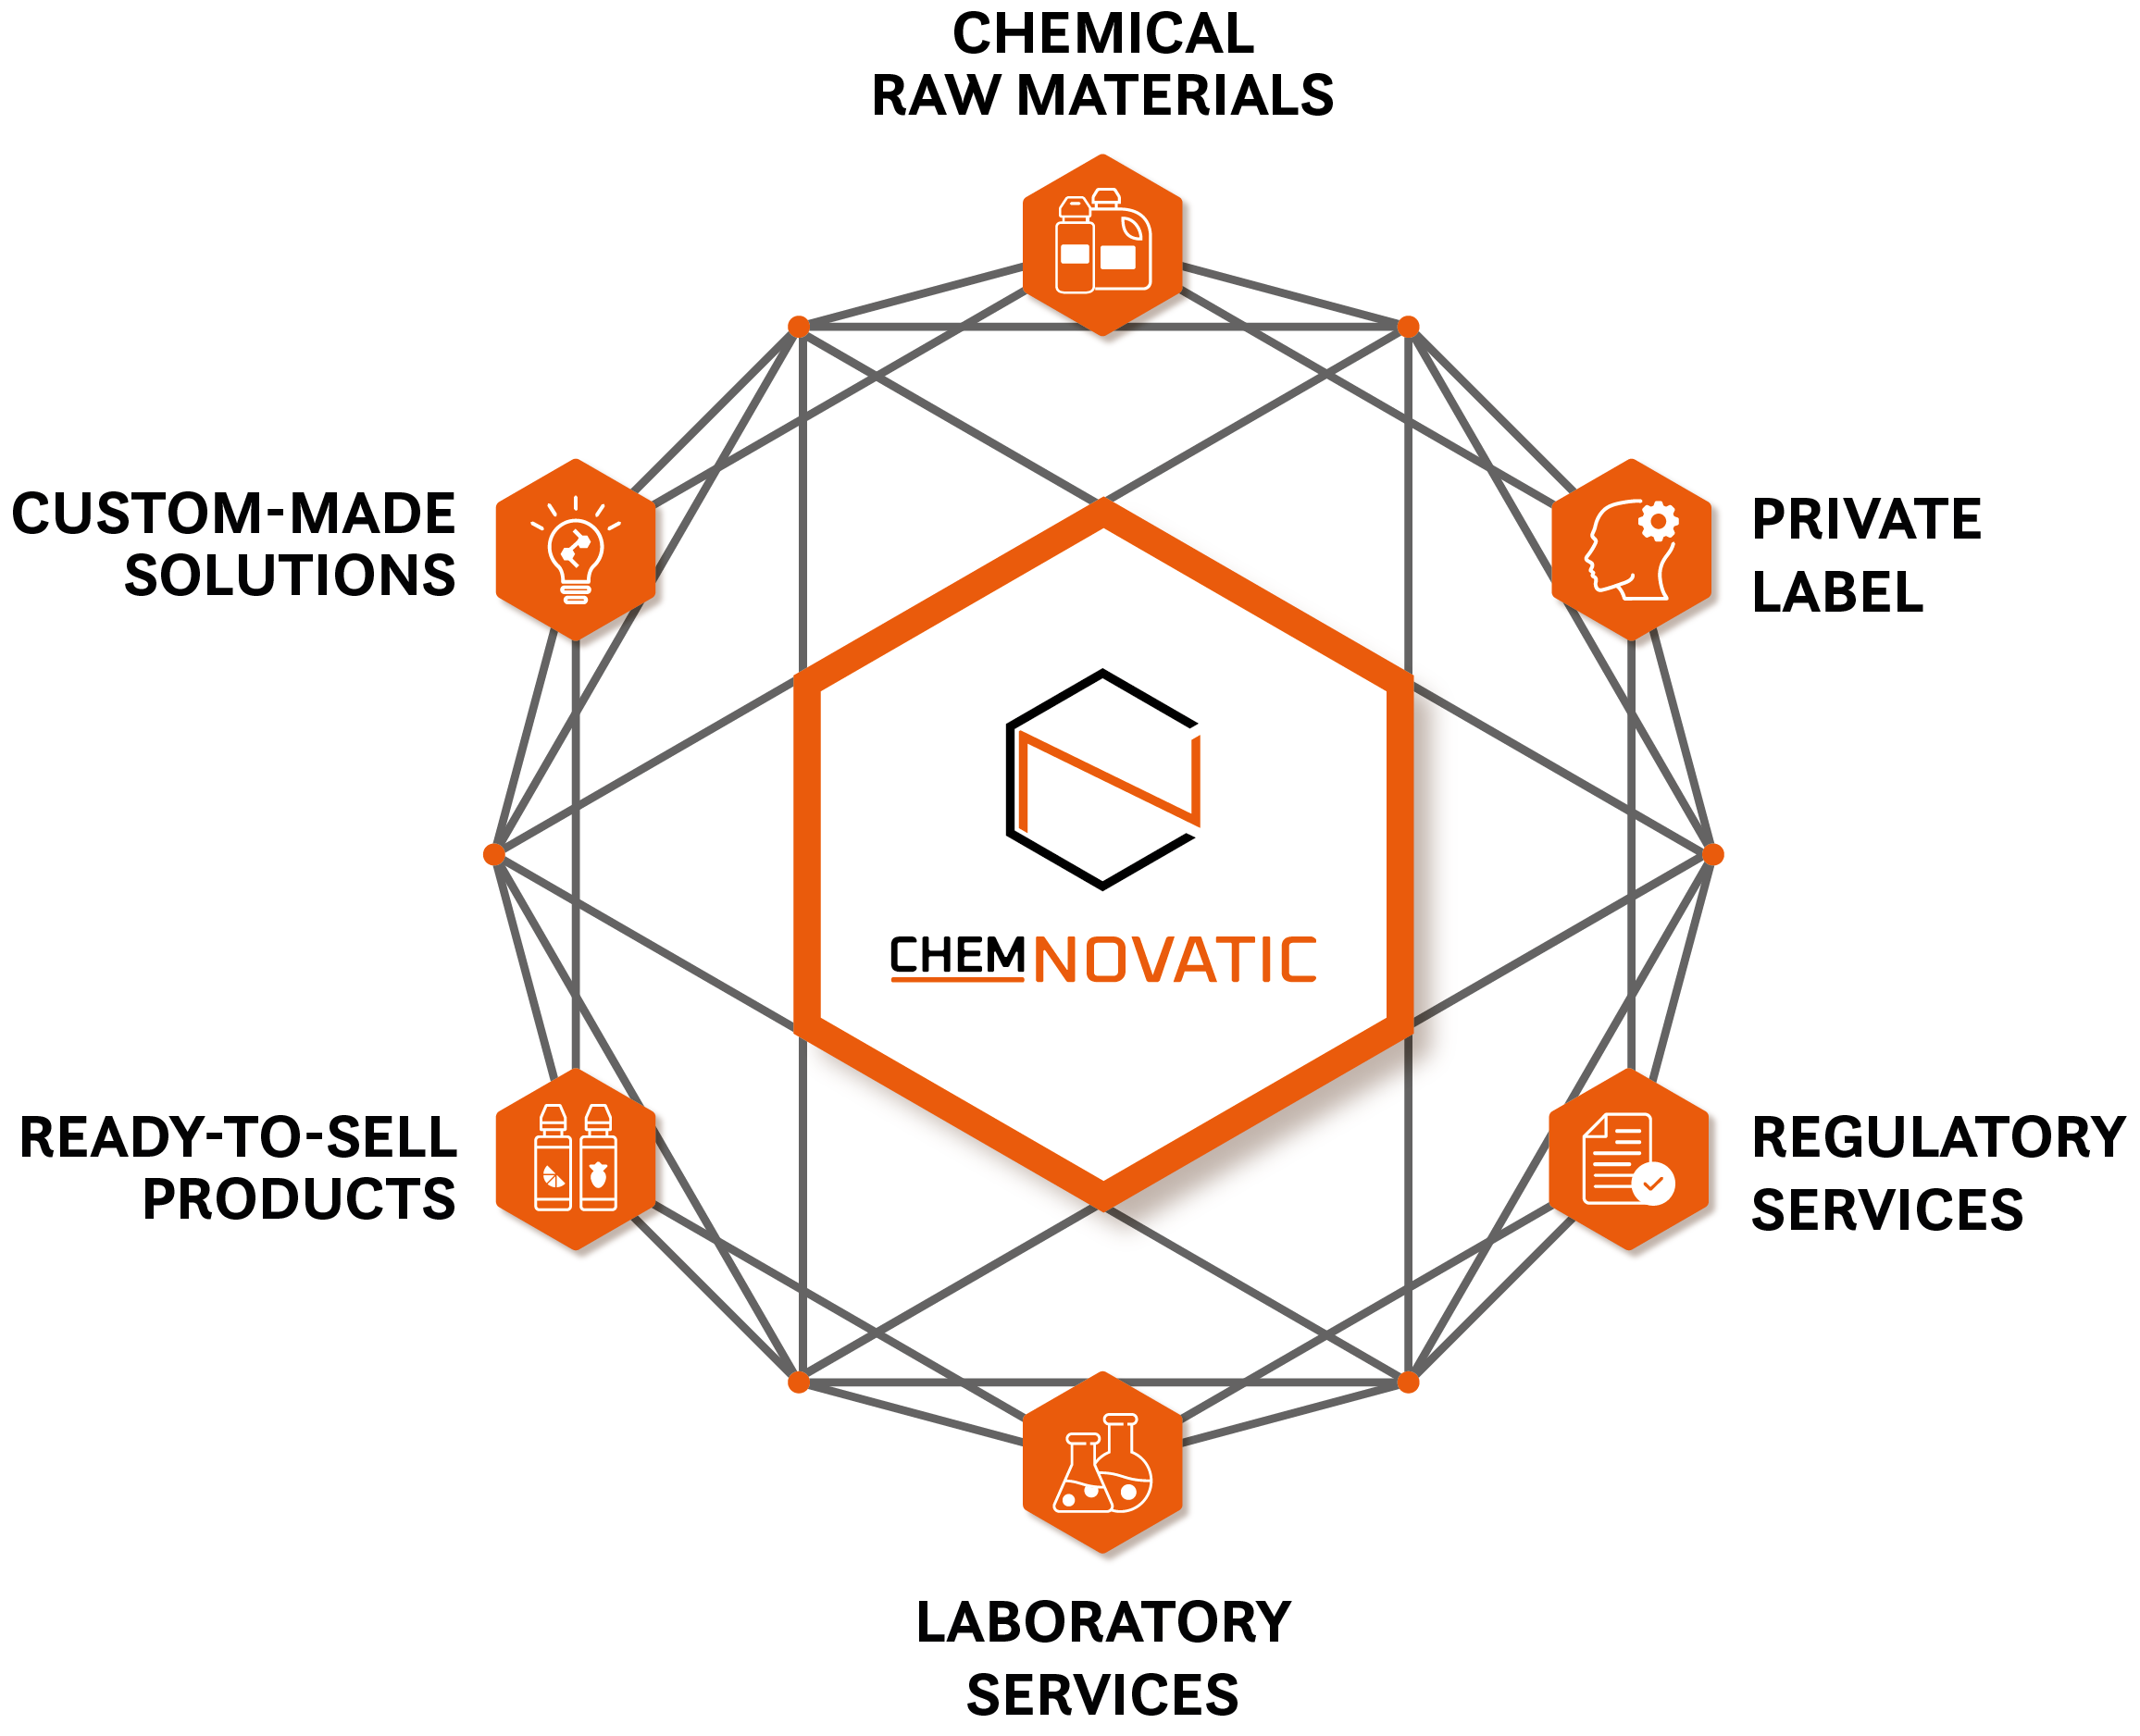 a diagram with chemnovatic logo in the middle and 6 points: chemical raw materials, private label, regulatory services, laboratory services, ready-to-sell products, custom-made solution